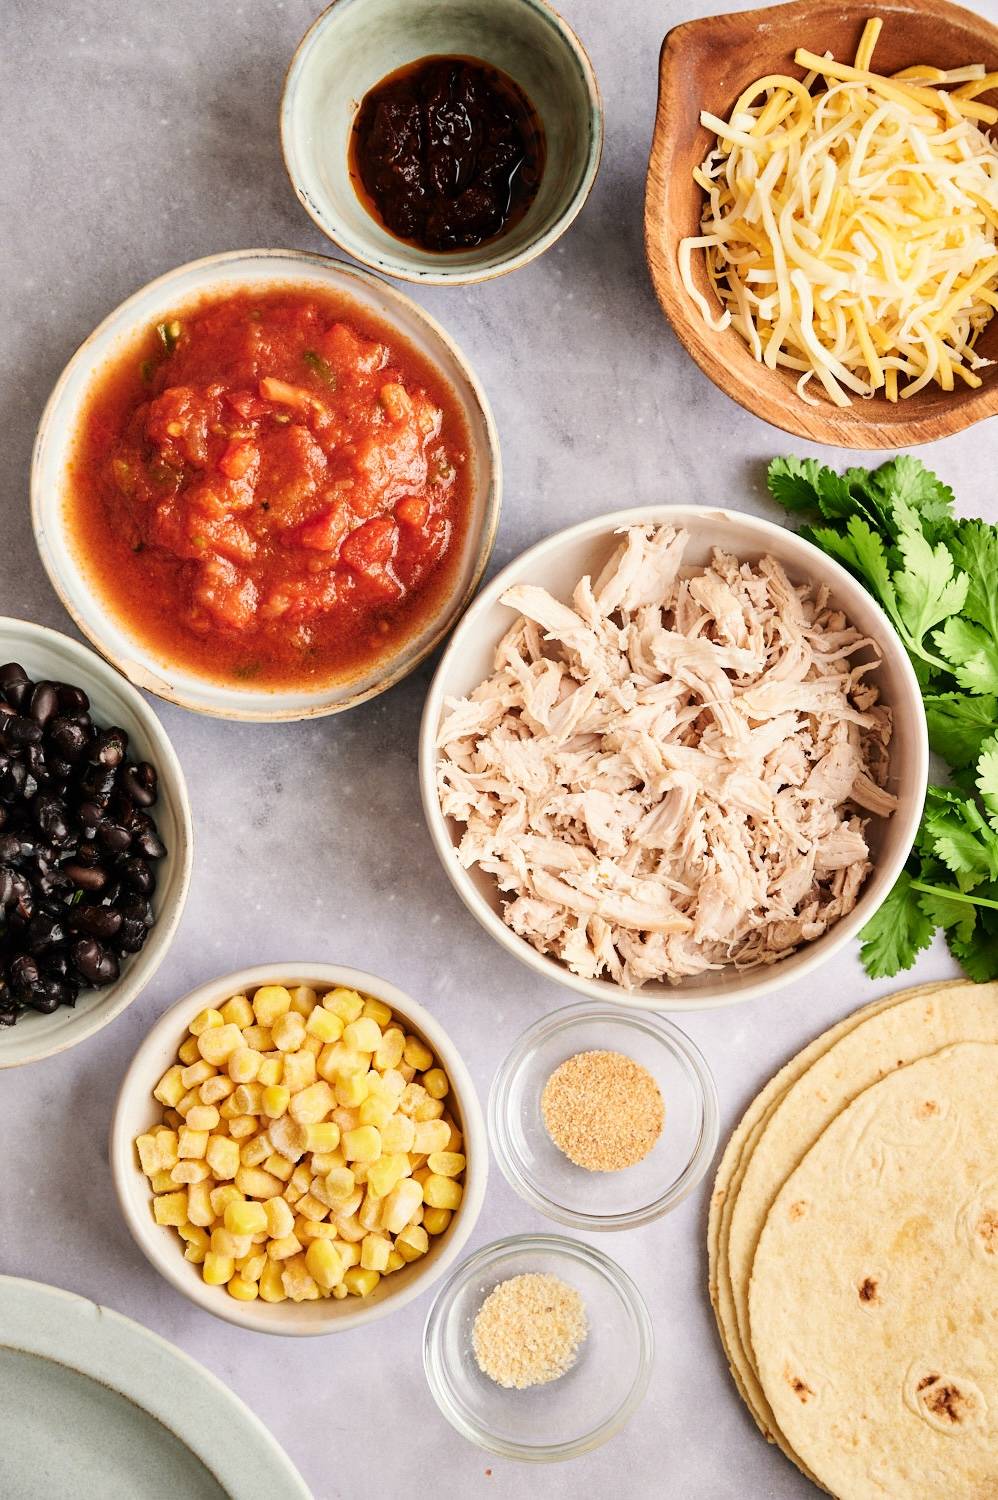 Ingredients for spicy chicken quesadillas including shredded chicken, corn, black beans, tortillas, cheese, salsa, and chipotle peppers.